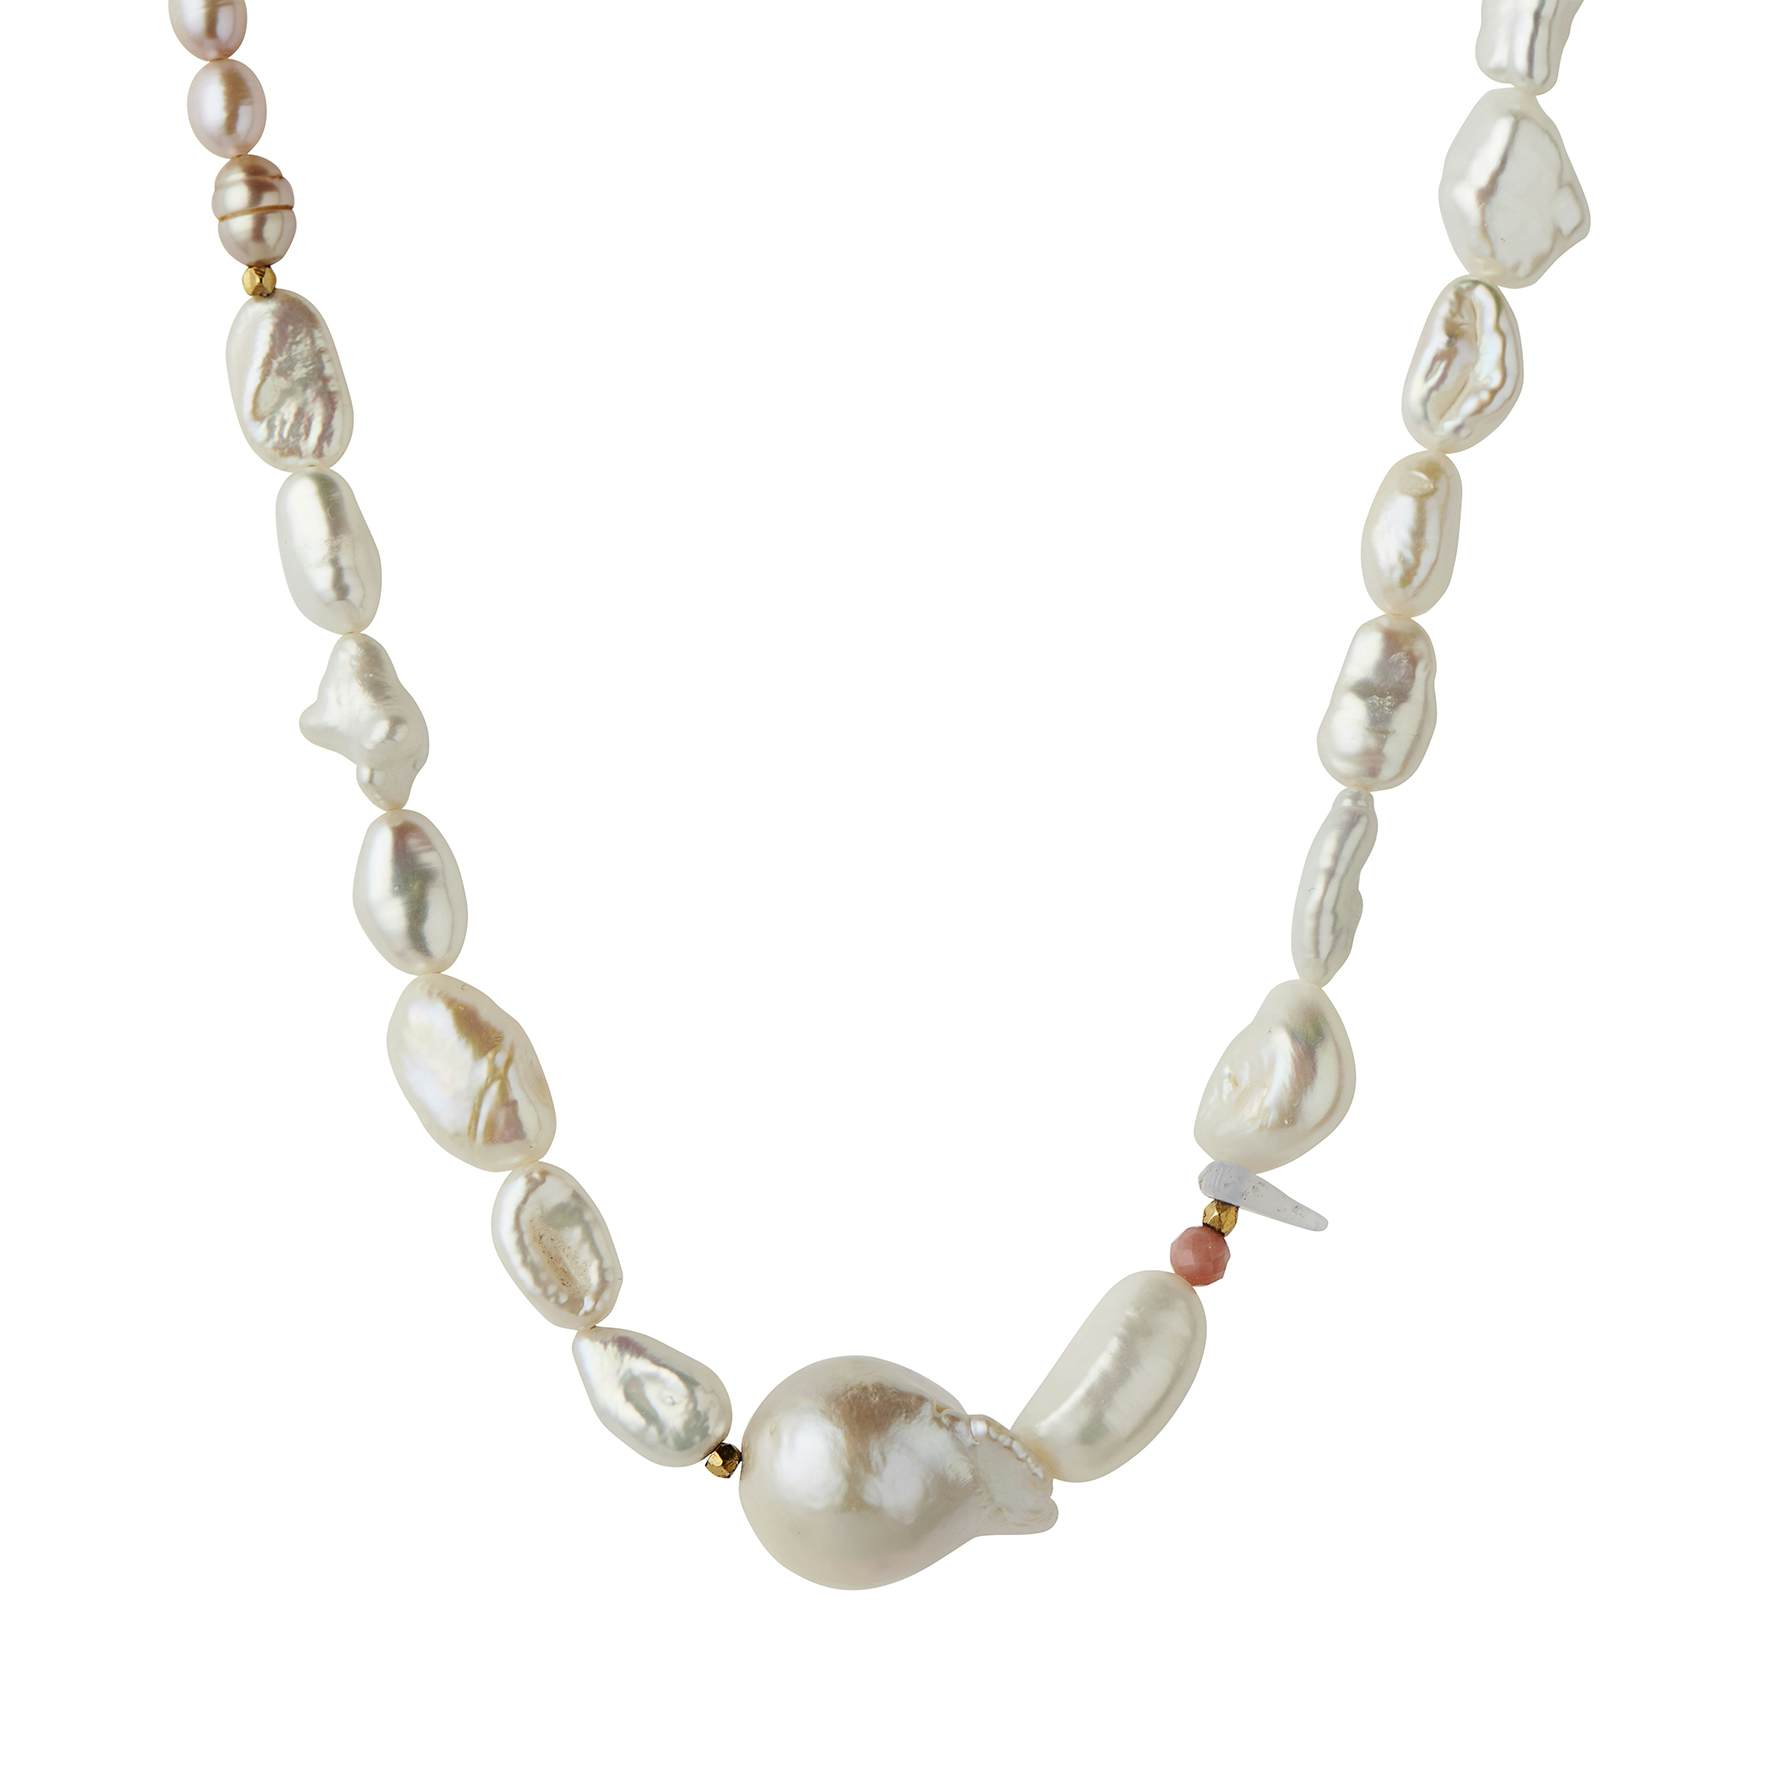 Chunky Glamour Pearl Necklace - White & Rose von STINE A Jewelry in Vergoldet-Silber Sterling 925